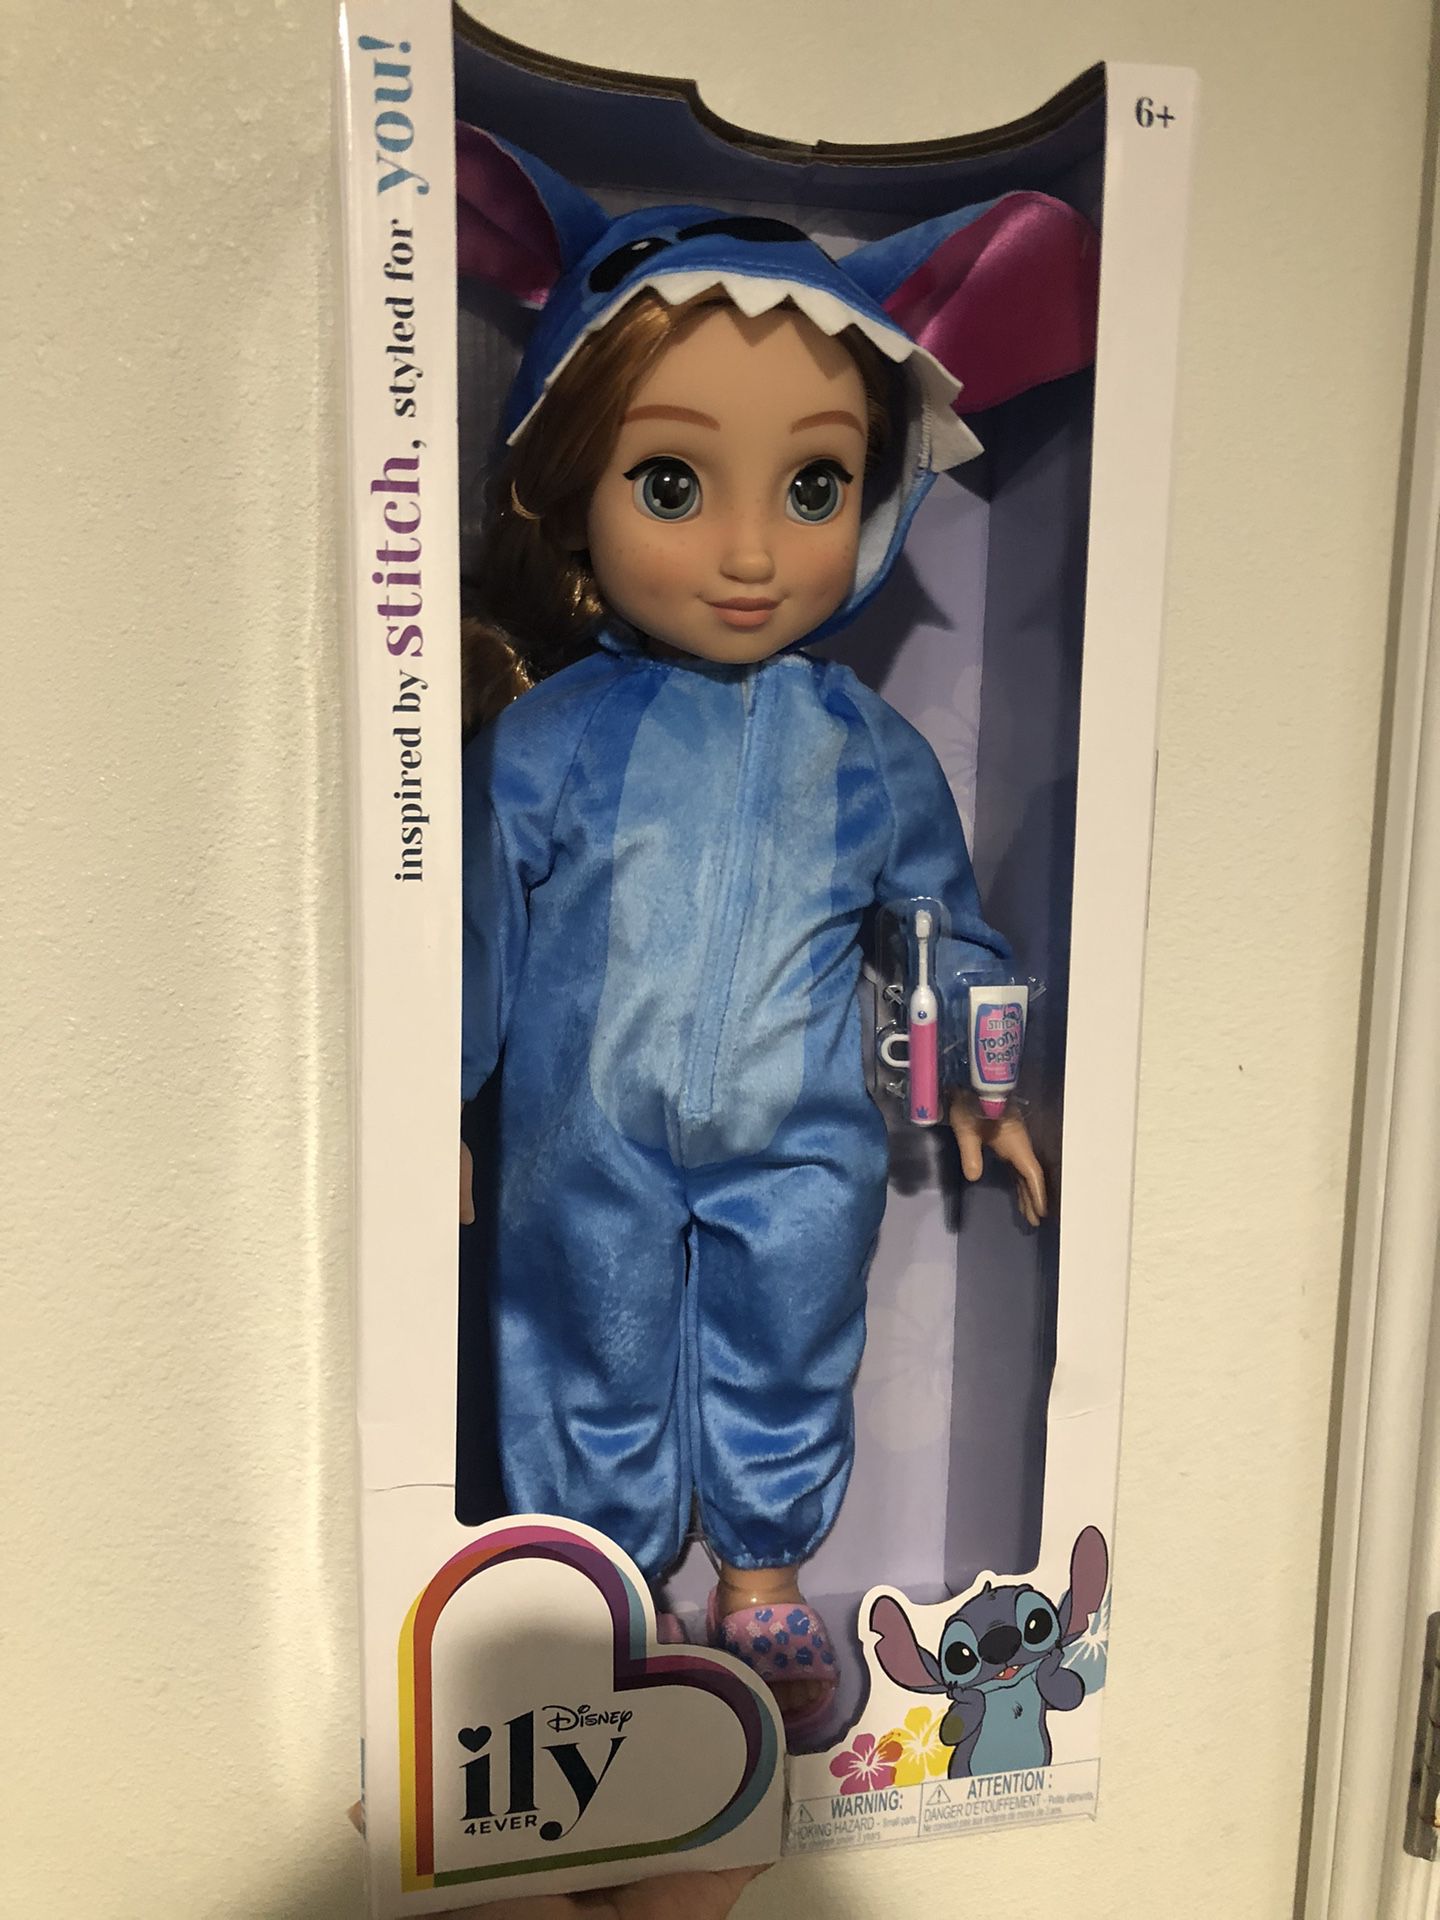 Disney ILY 4ever inspired by stitch 18” Doll Strawberry Blonde Hair for  Sale in Rowland Heights, CA - OfferUp